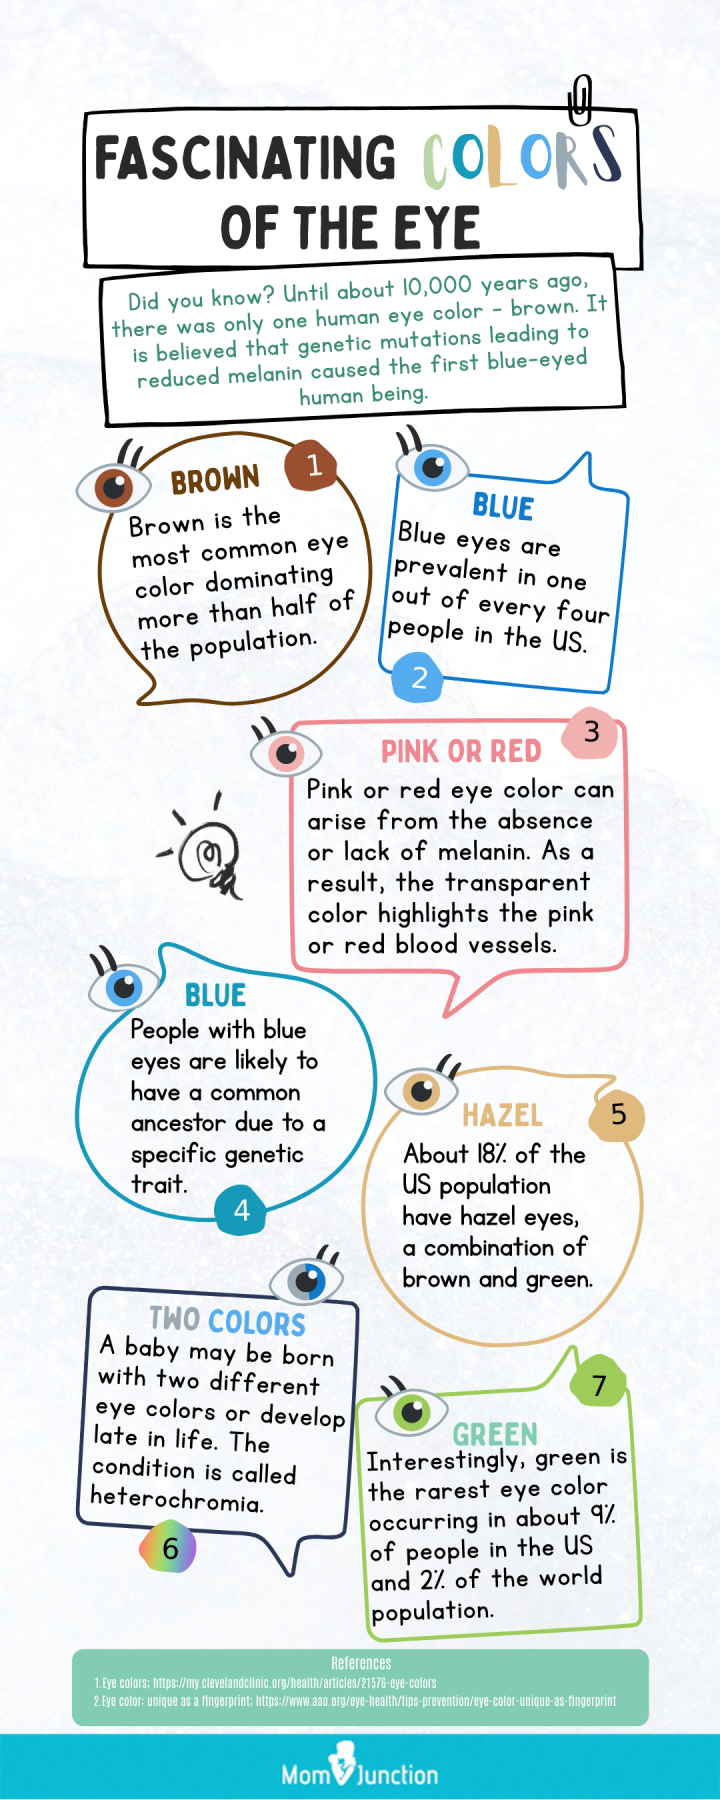 fascinating colors of the eye(infographic)